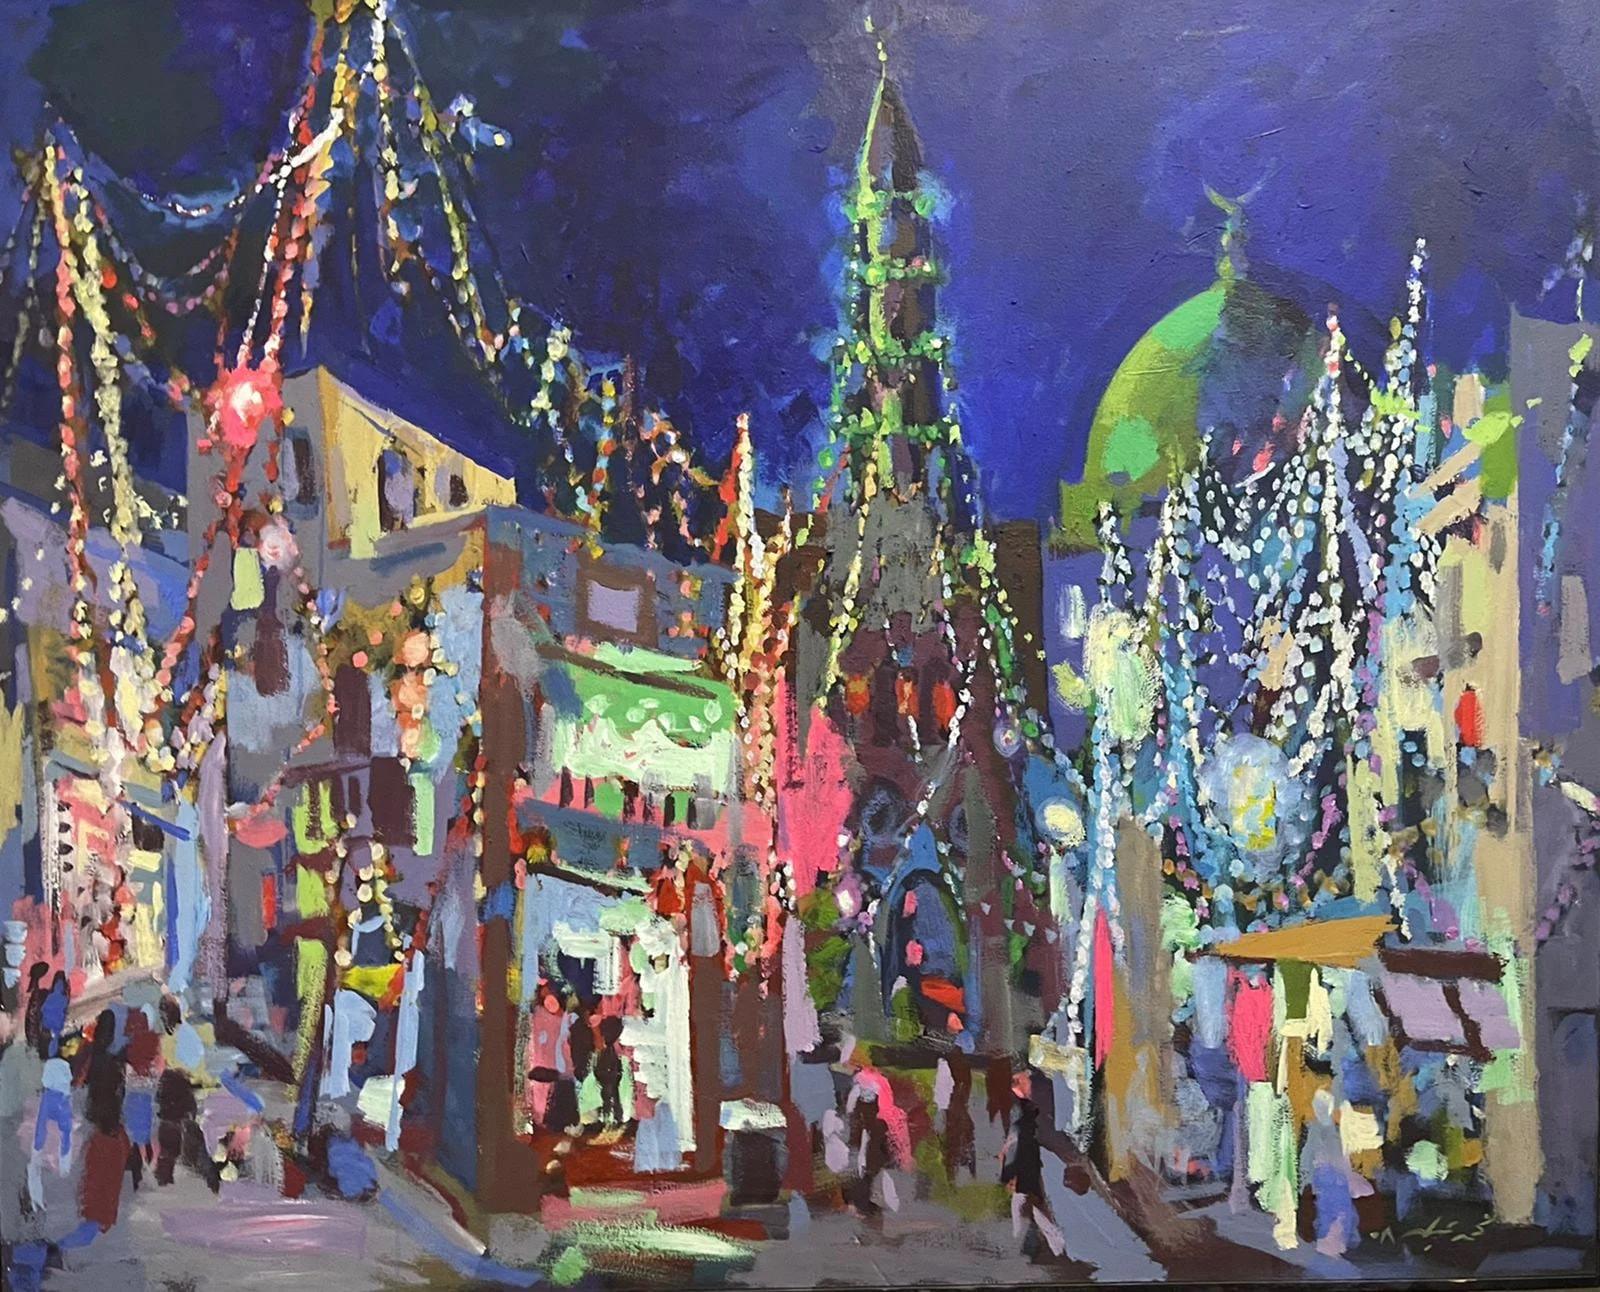 "City Festival" Painting 51" x 63" inch by Mohamed Abla


Mohamed Abla was born in Mansoura (North of Egypt) in 1953. There he spent his childhood and finished school. In 1973 he moved to Alexandria to start a five-year art study at the faculty of